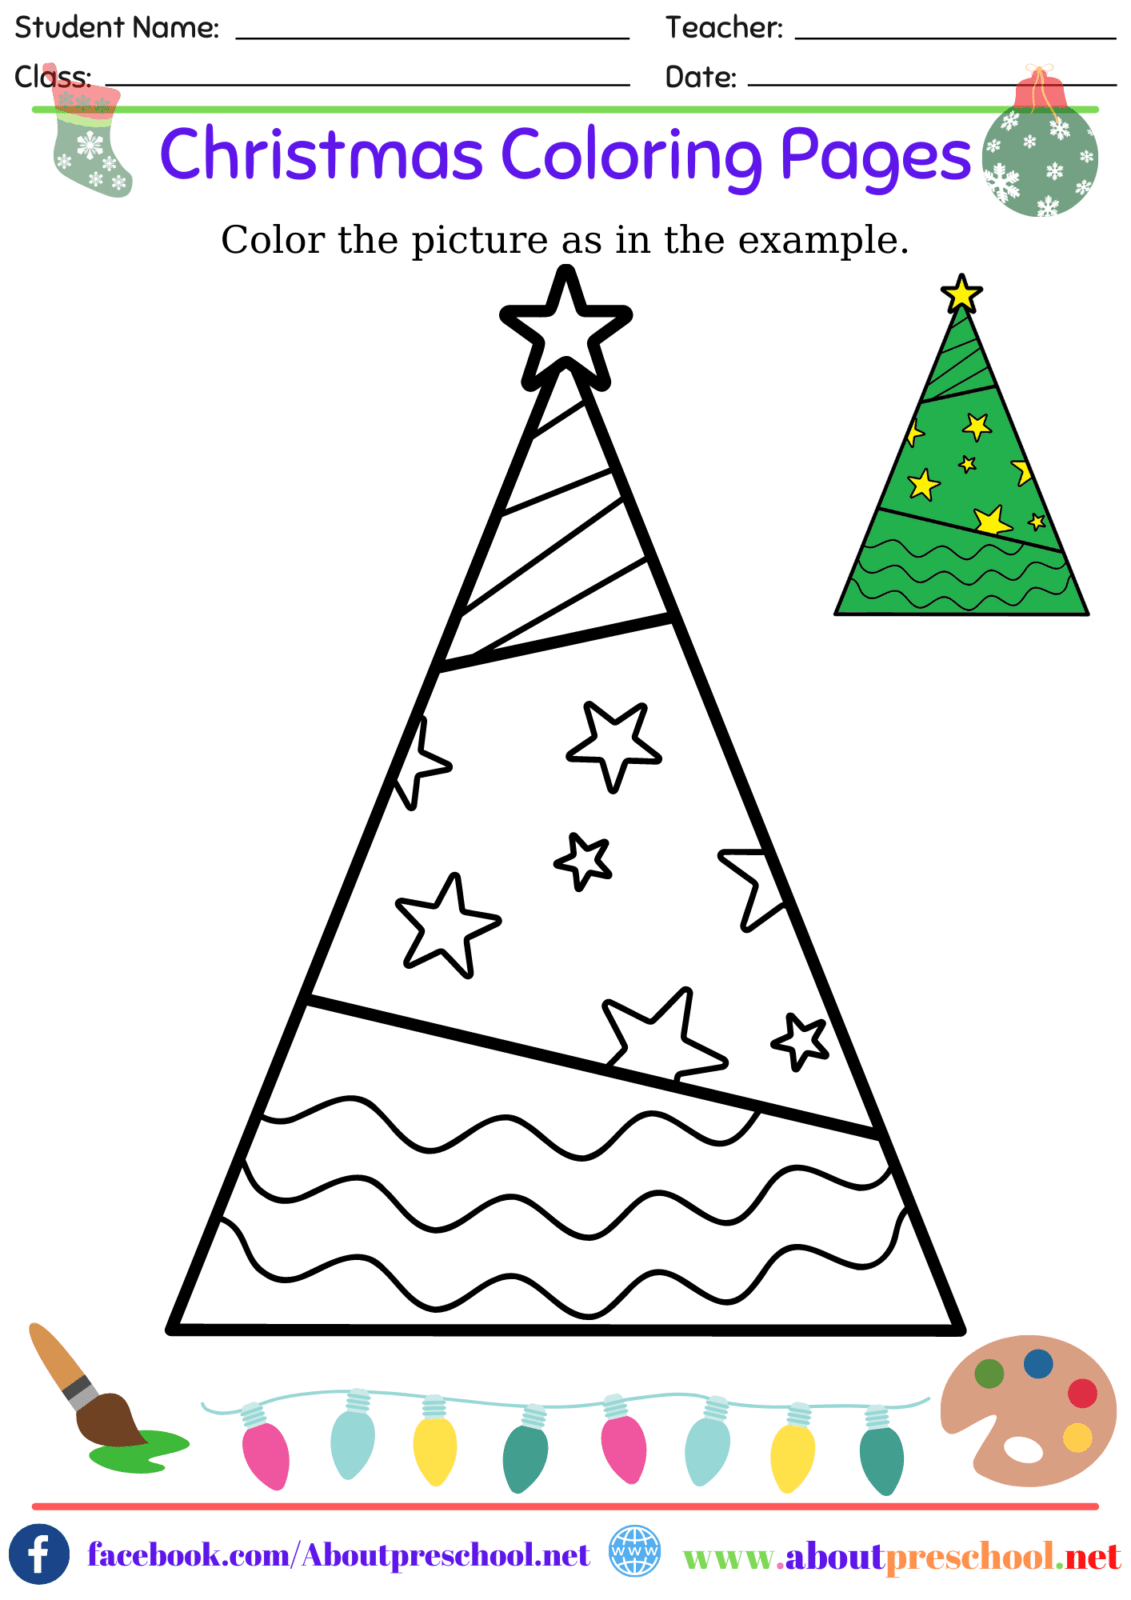 Christmas Coloring Pages 10